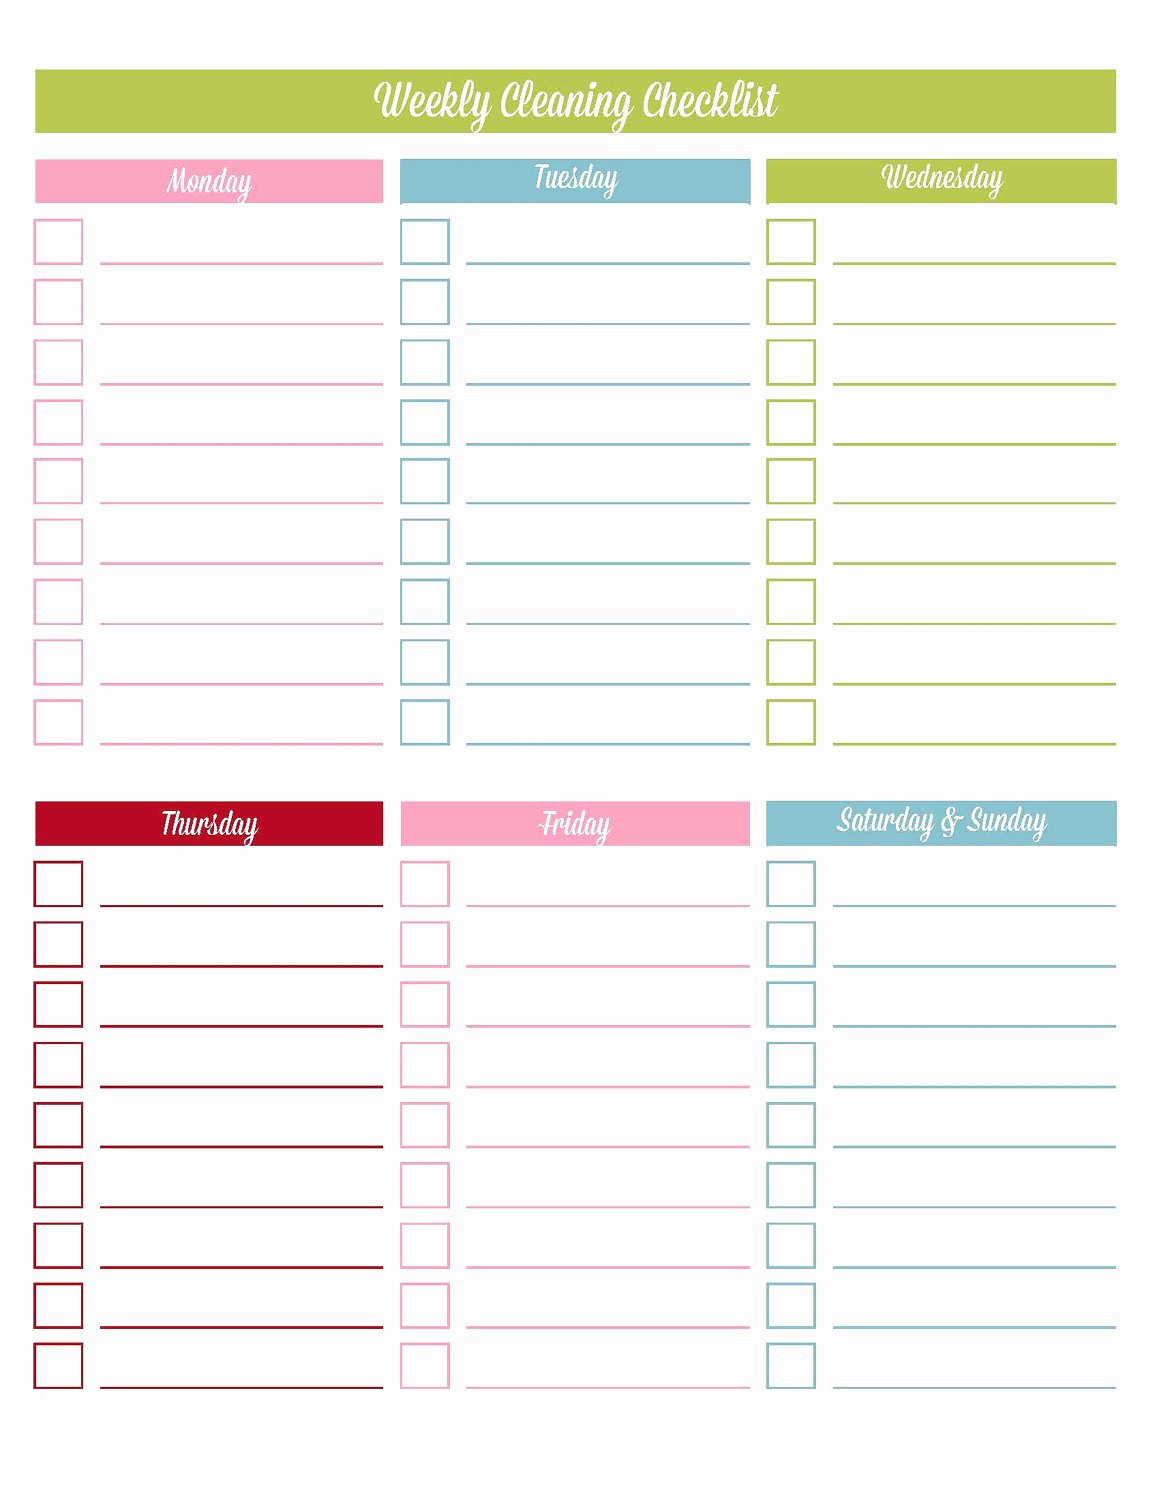 Blank Check Template Editable Elegant Weekly Cleaning Checklist Editable Printable Pdf Instant